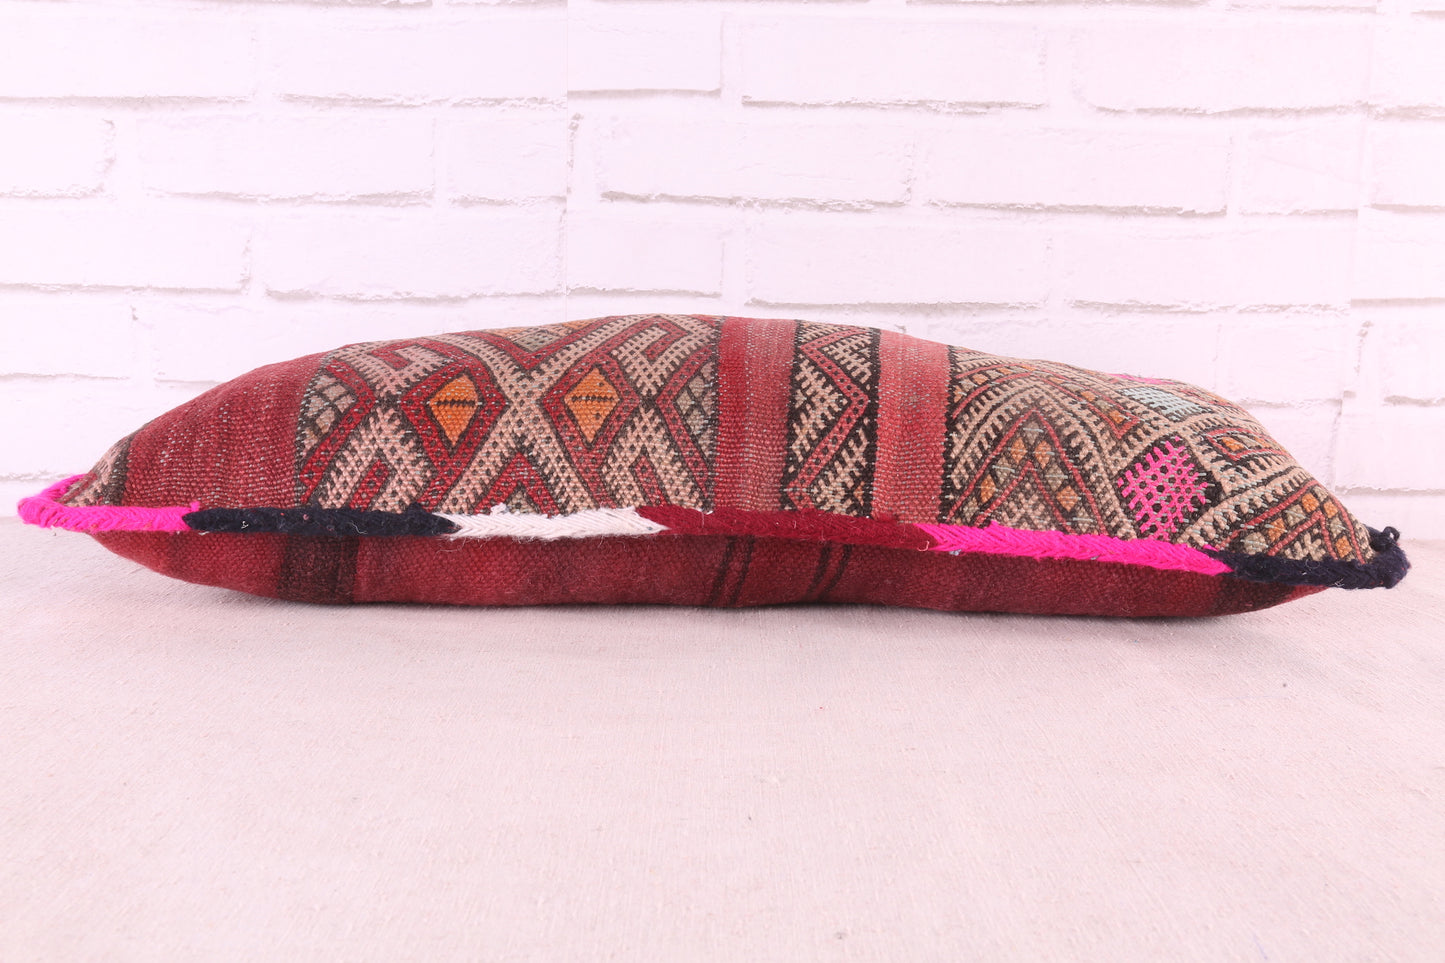 moroccan pillow old kilim 12.5 inches X 26.7 inches